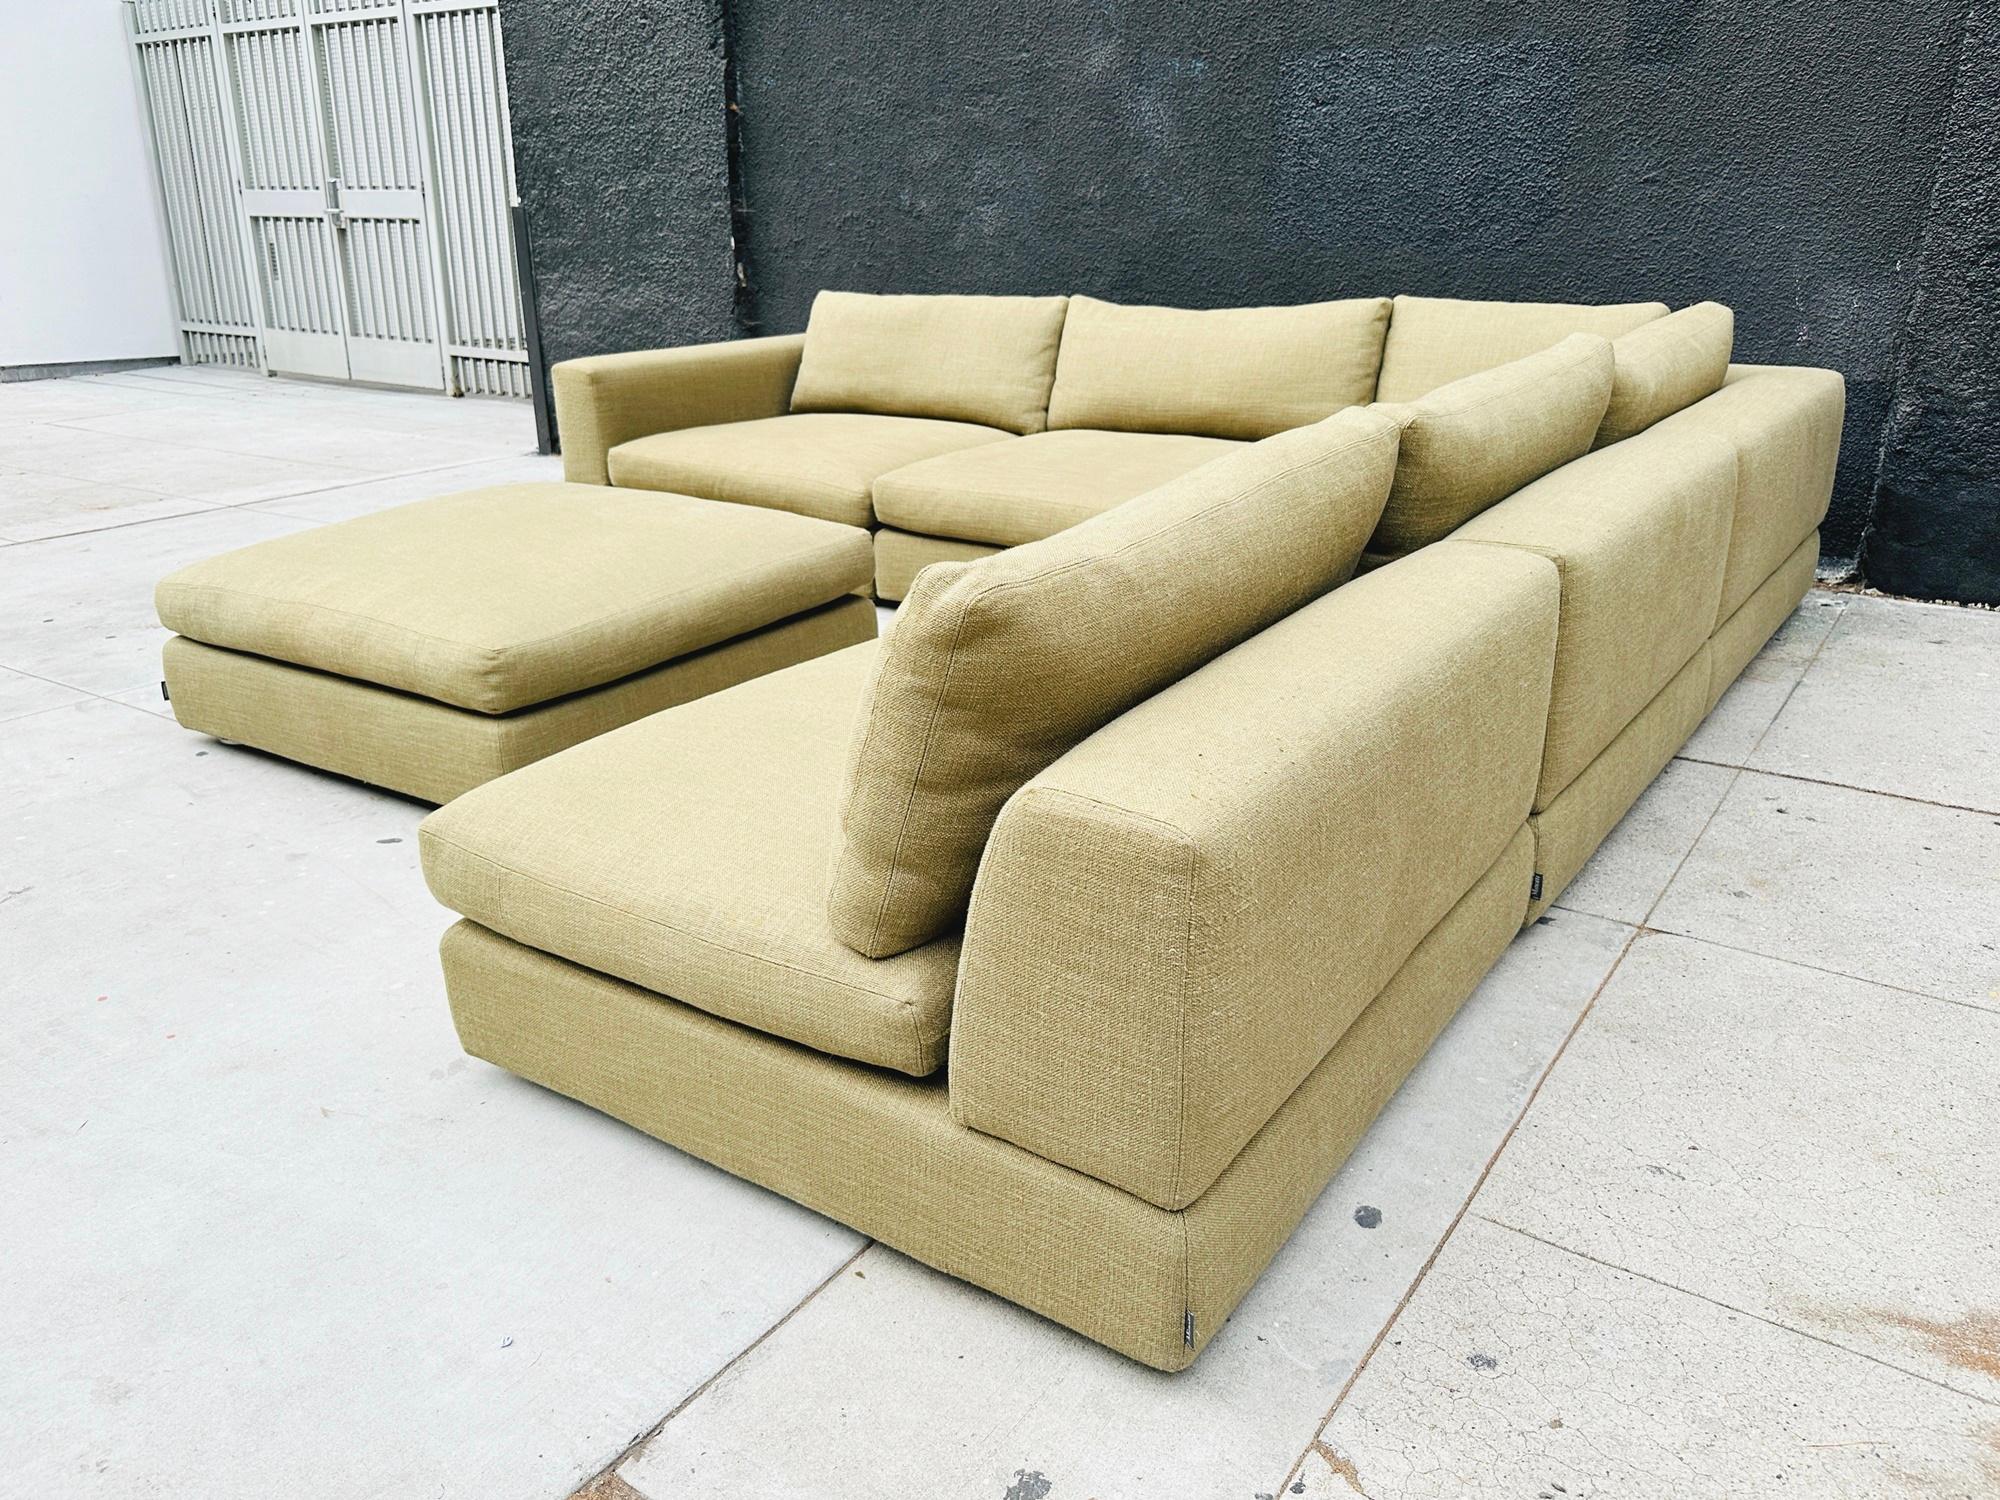 6 Piece Sectional Made in Italy by Rodolfo Dordoni for Minotti, Italy 2006 For Sale 2